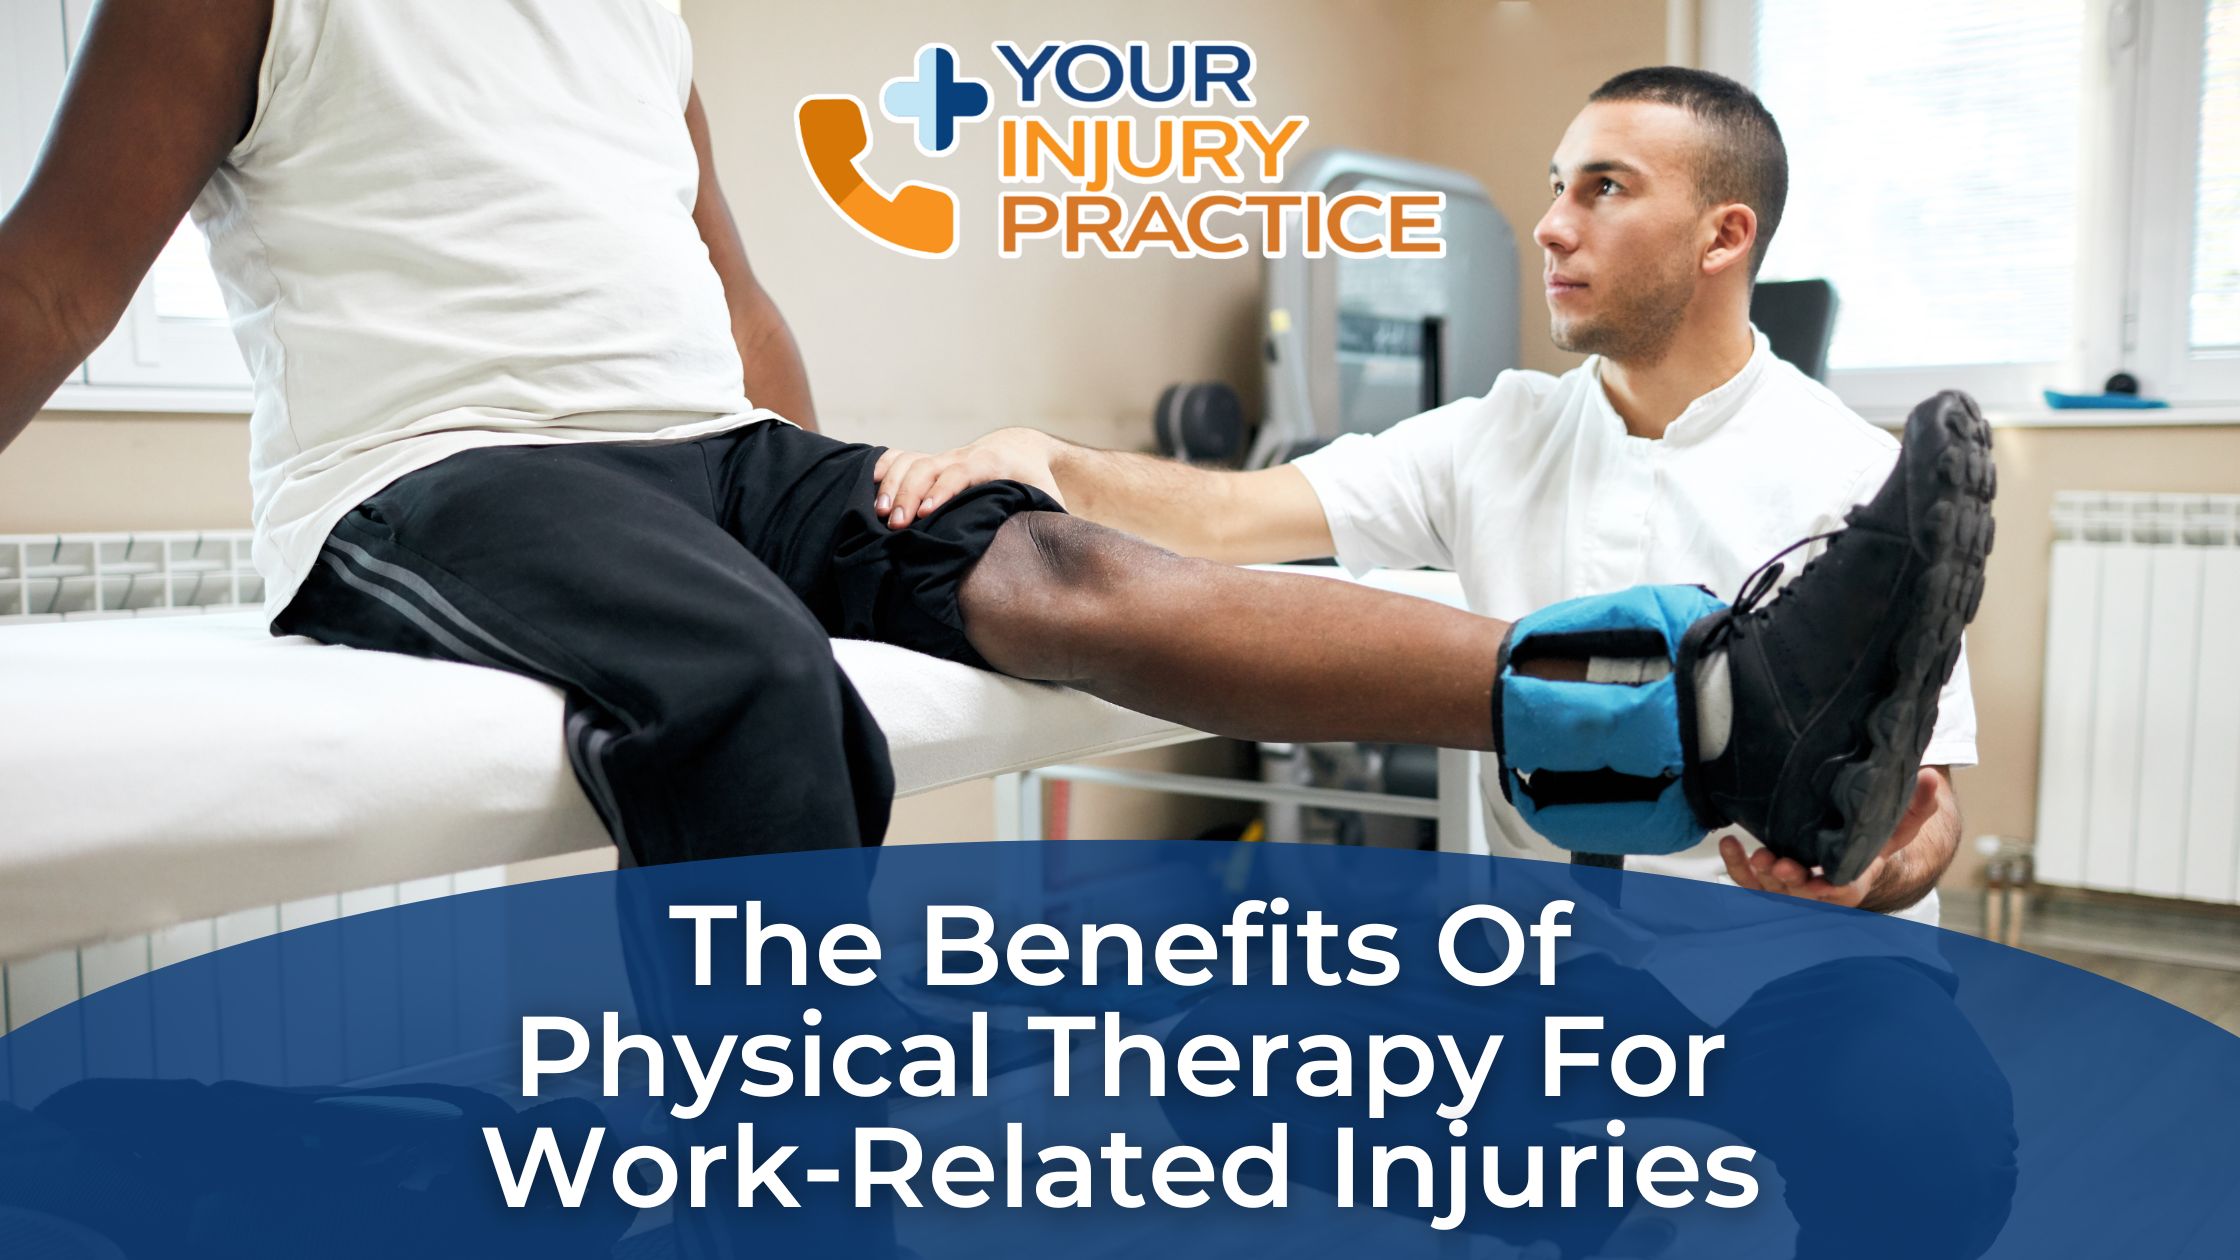 The Benefits of Physical Therapy for Work-Related Injuries